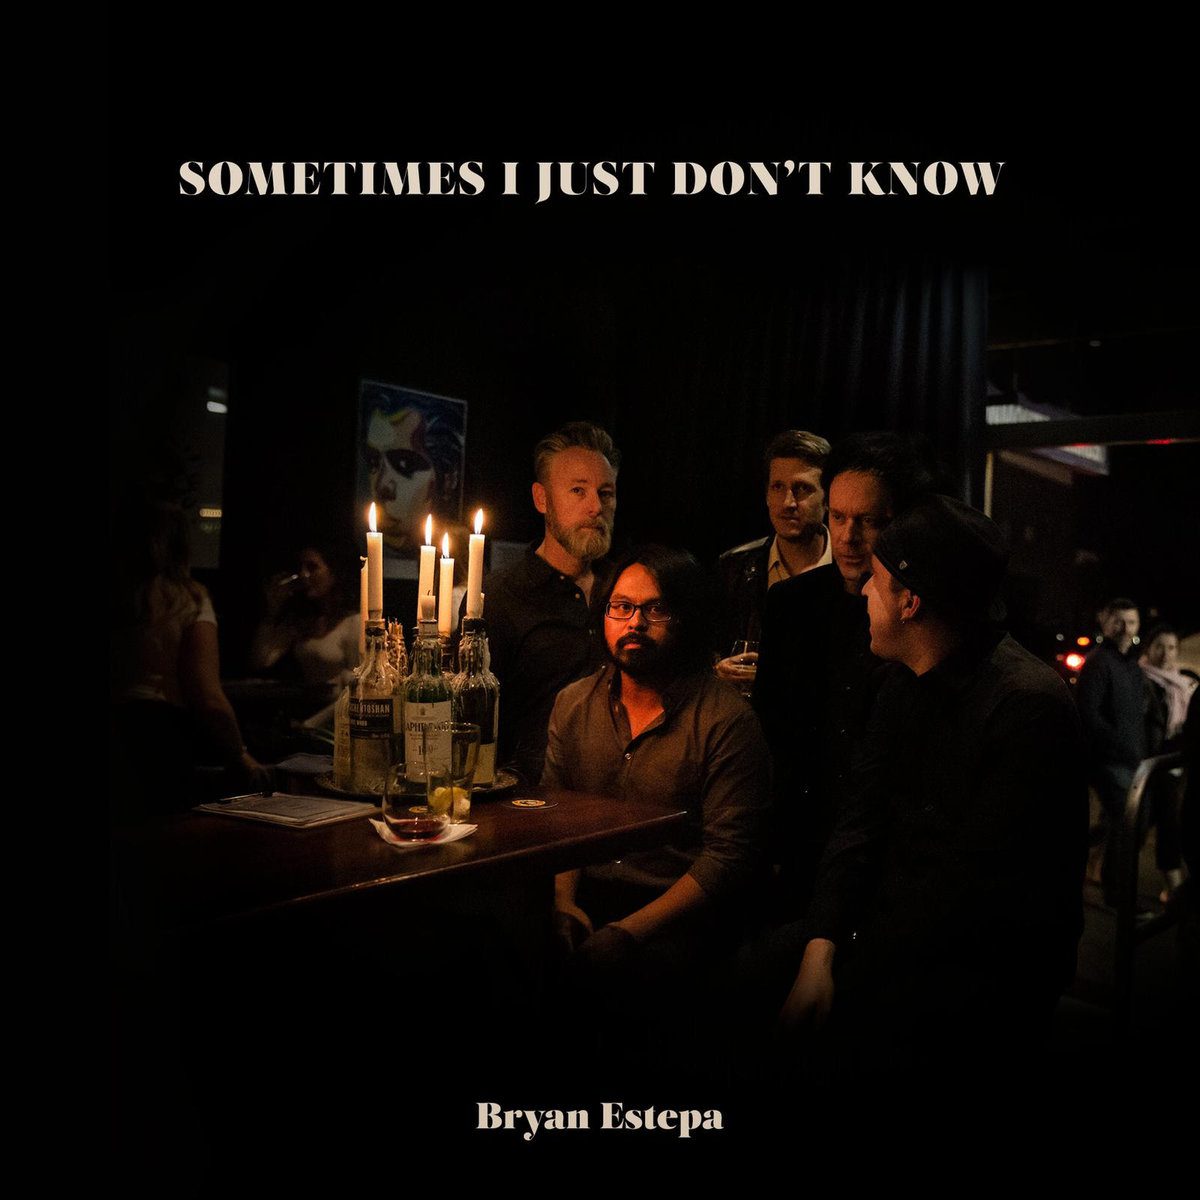 BRYAN ESTEPA – Sometimes I just don’t know